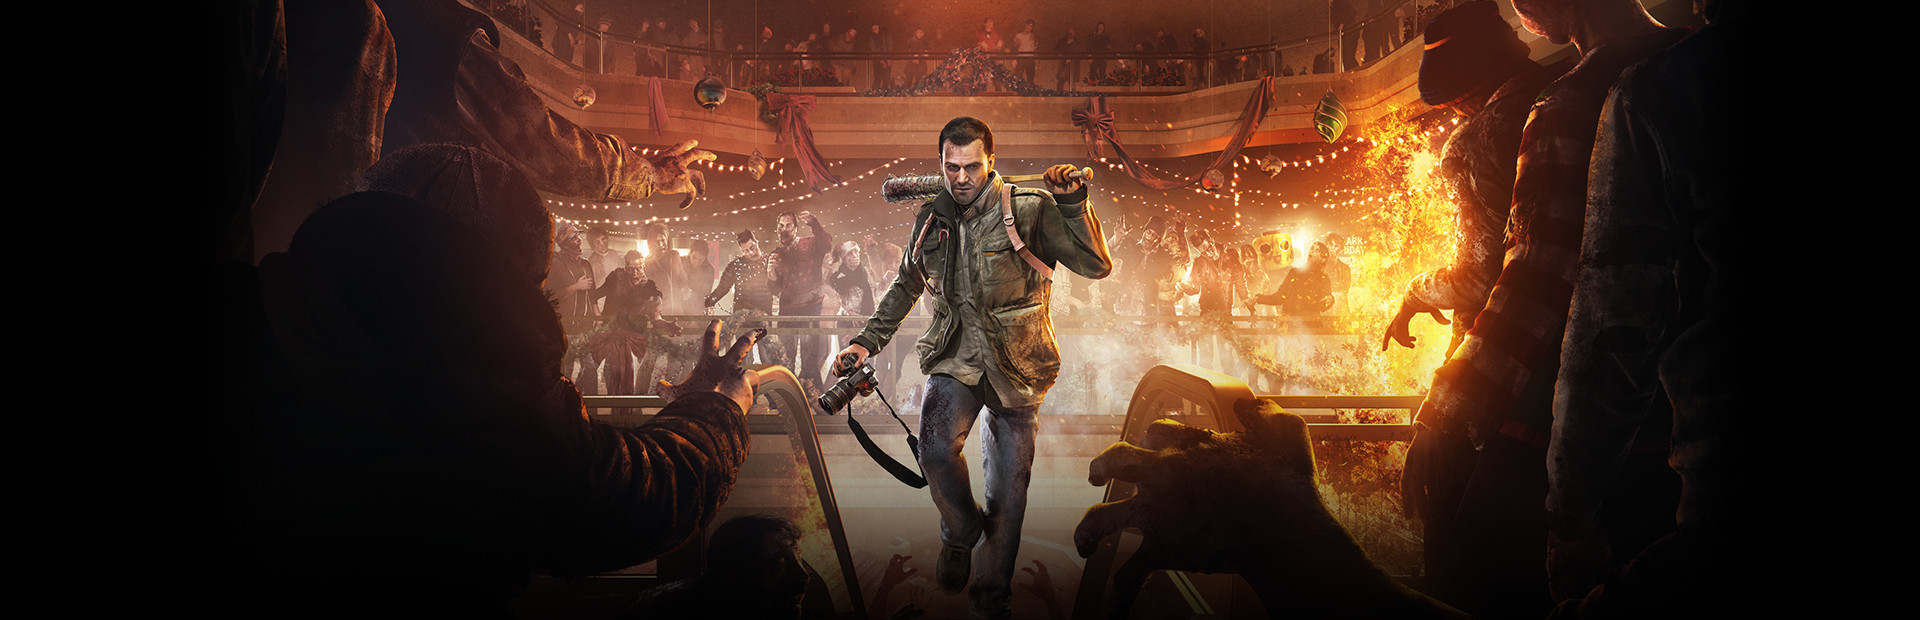 Dead Rising 4 cover image